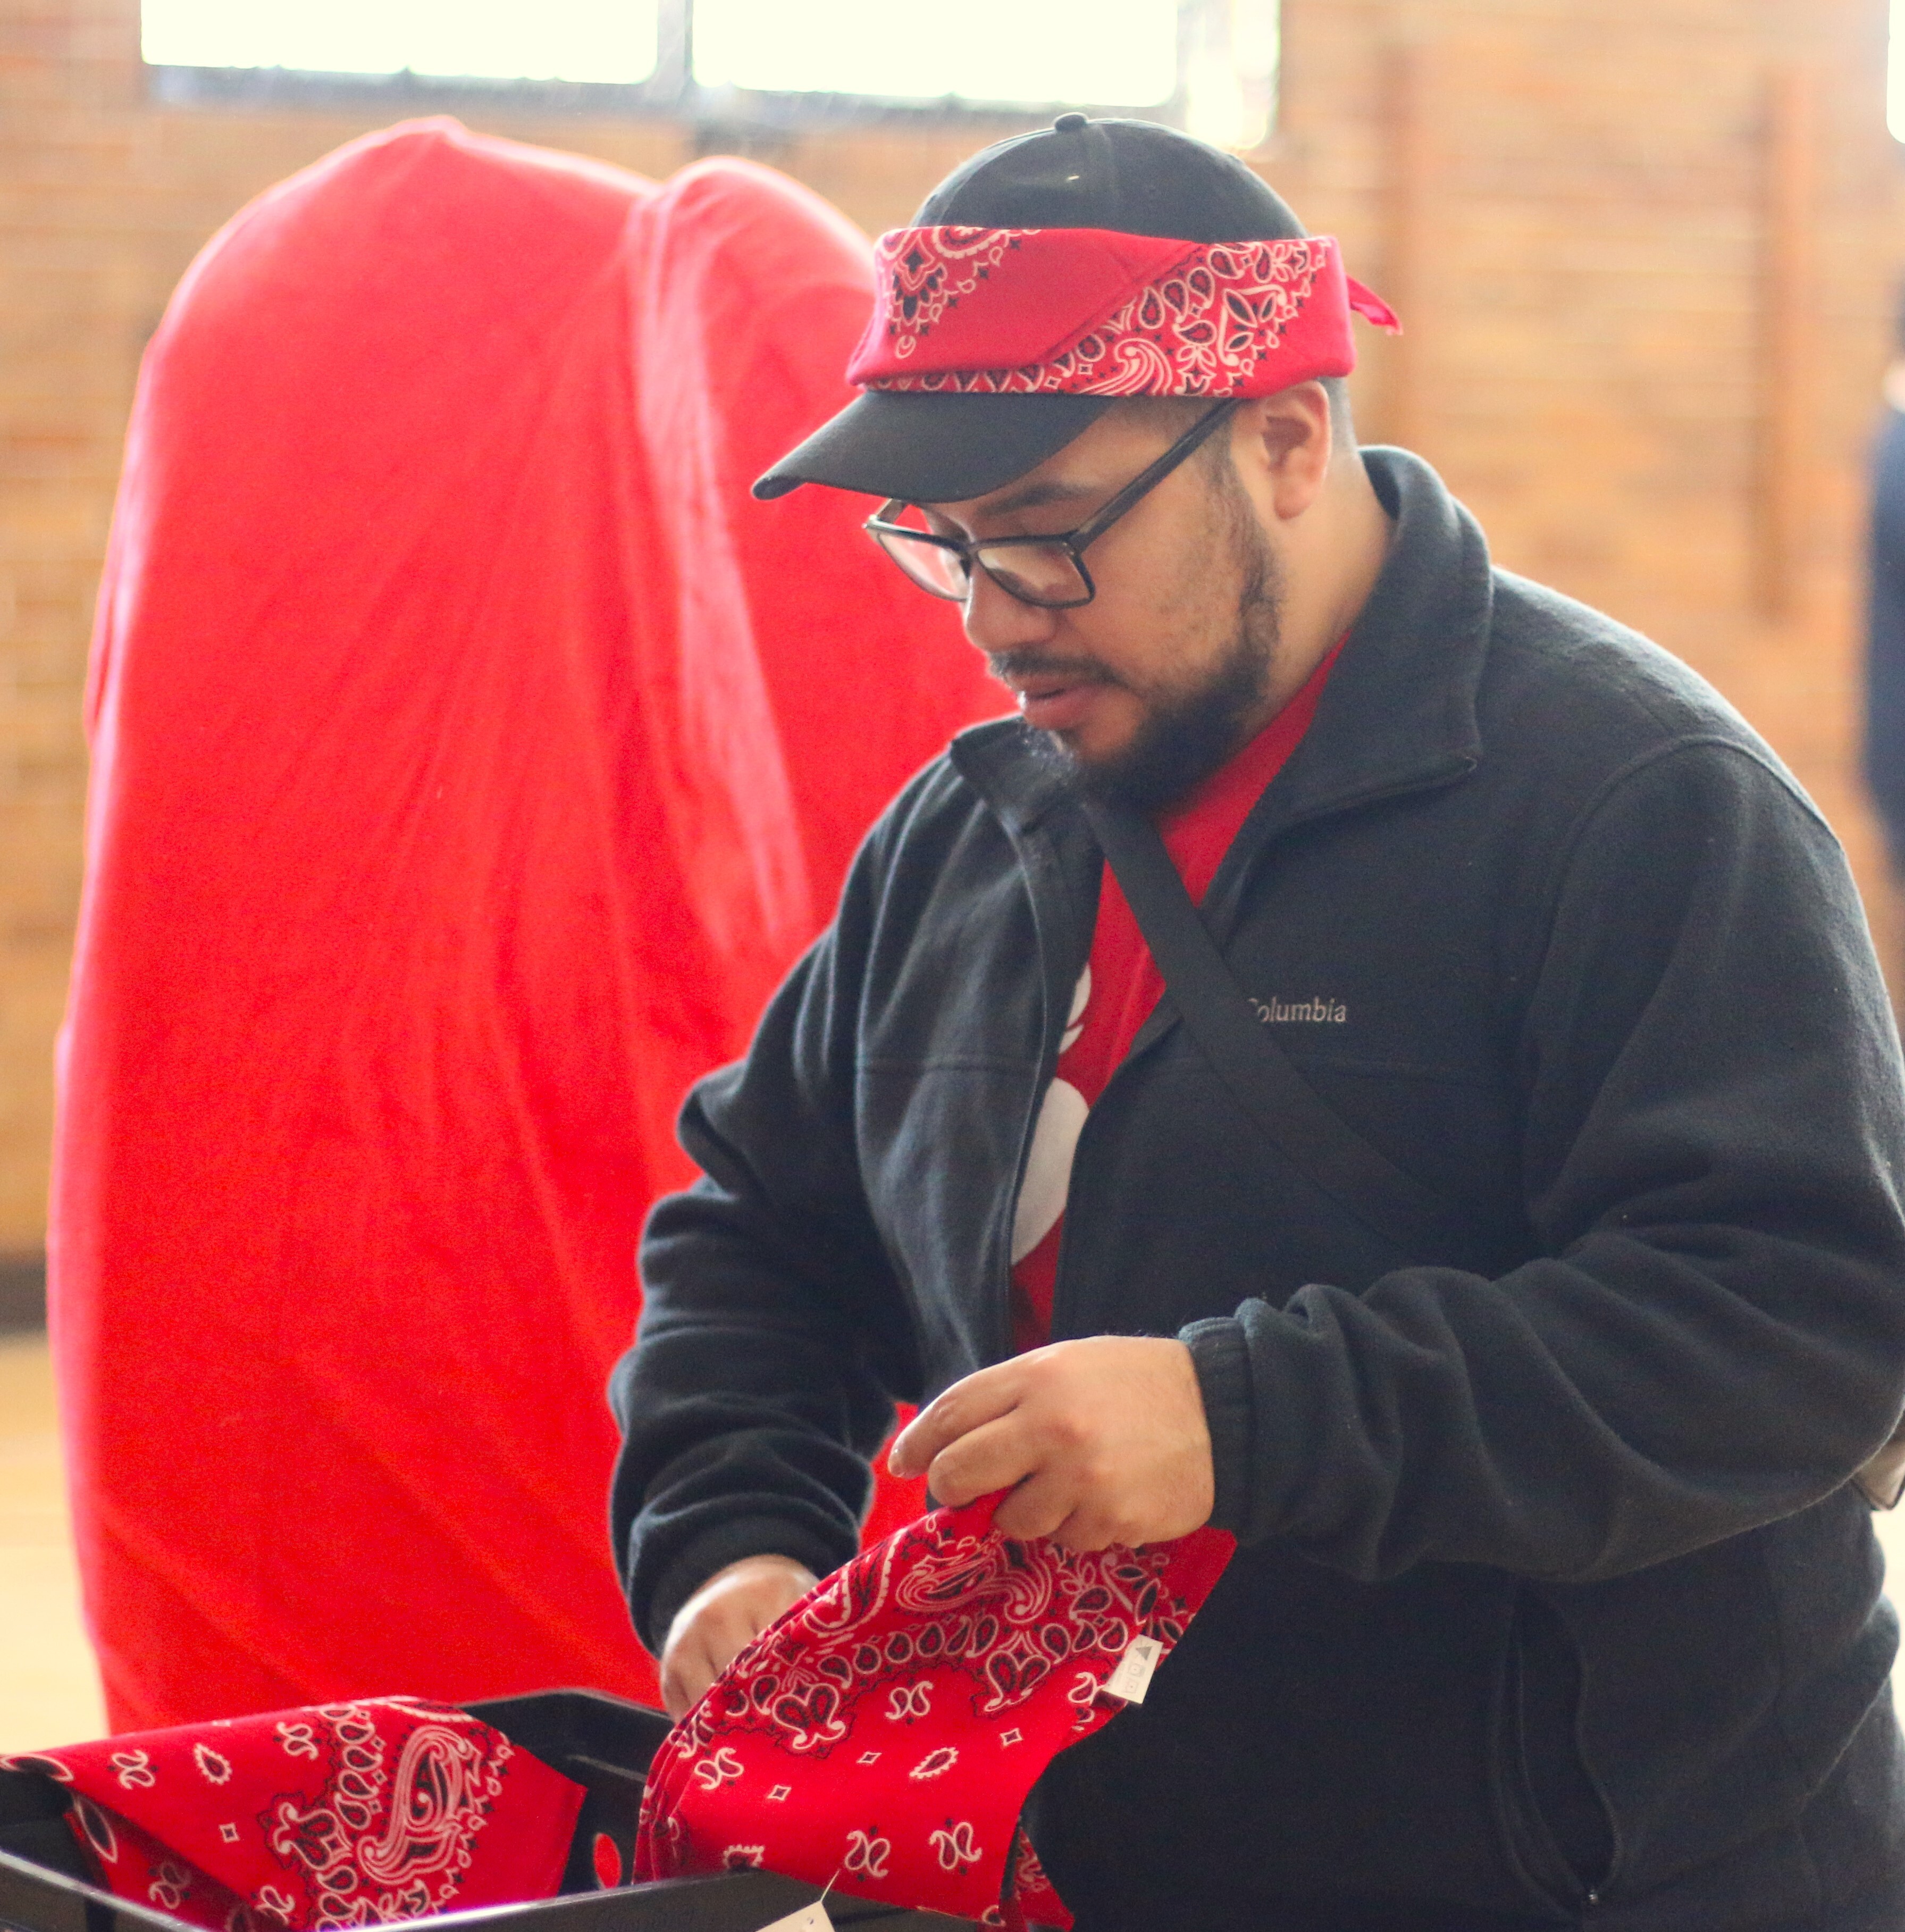 Javier Cervantes hands out red bandanas to North Park Montessori students as they enter the gym for their Wear Red Day Dance Party